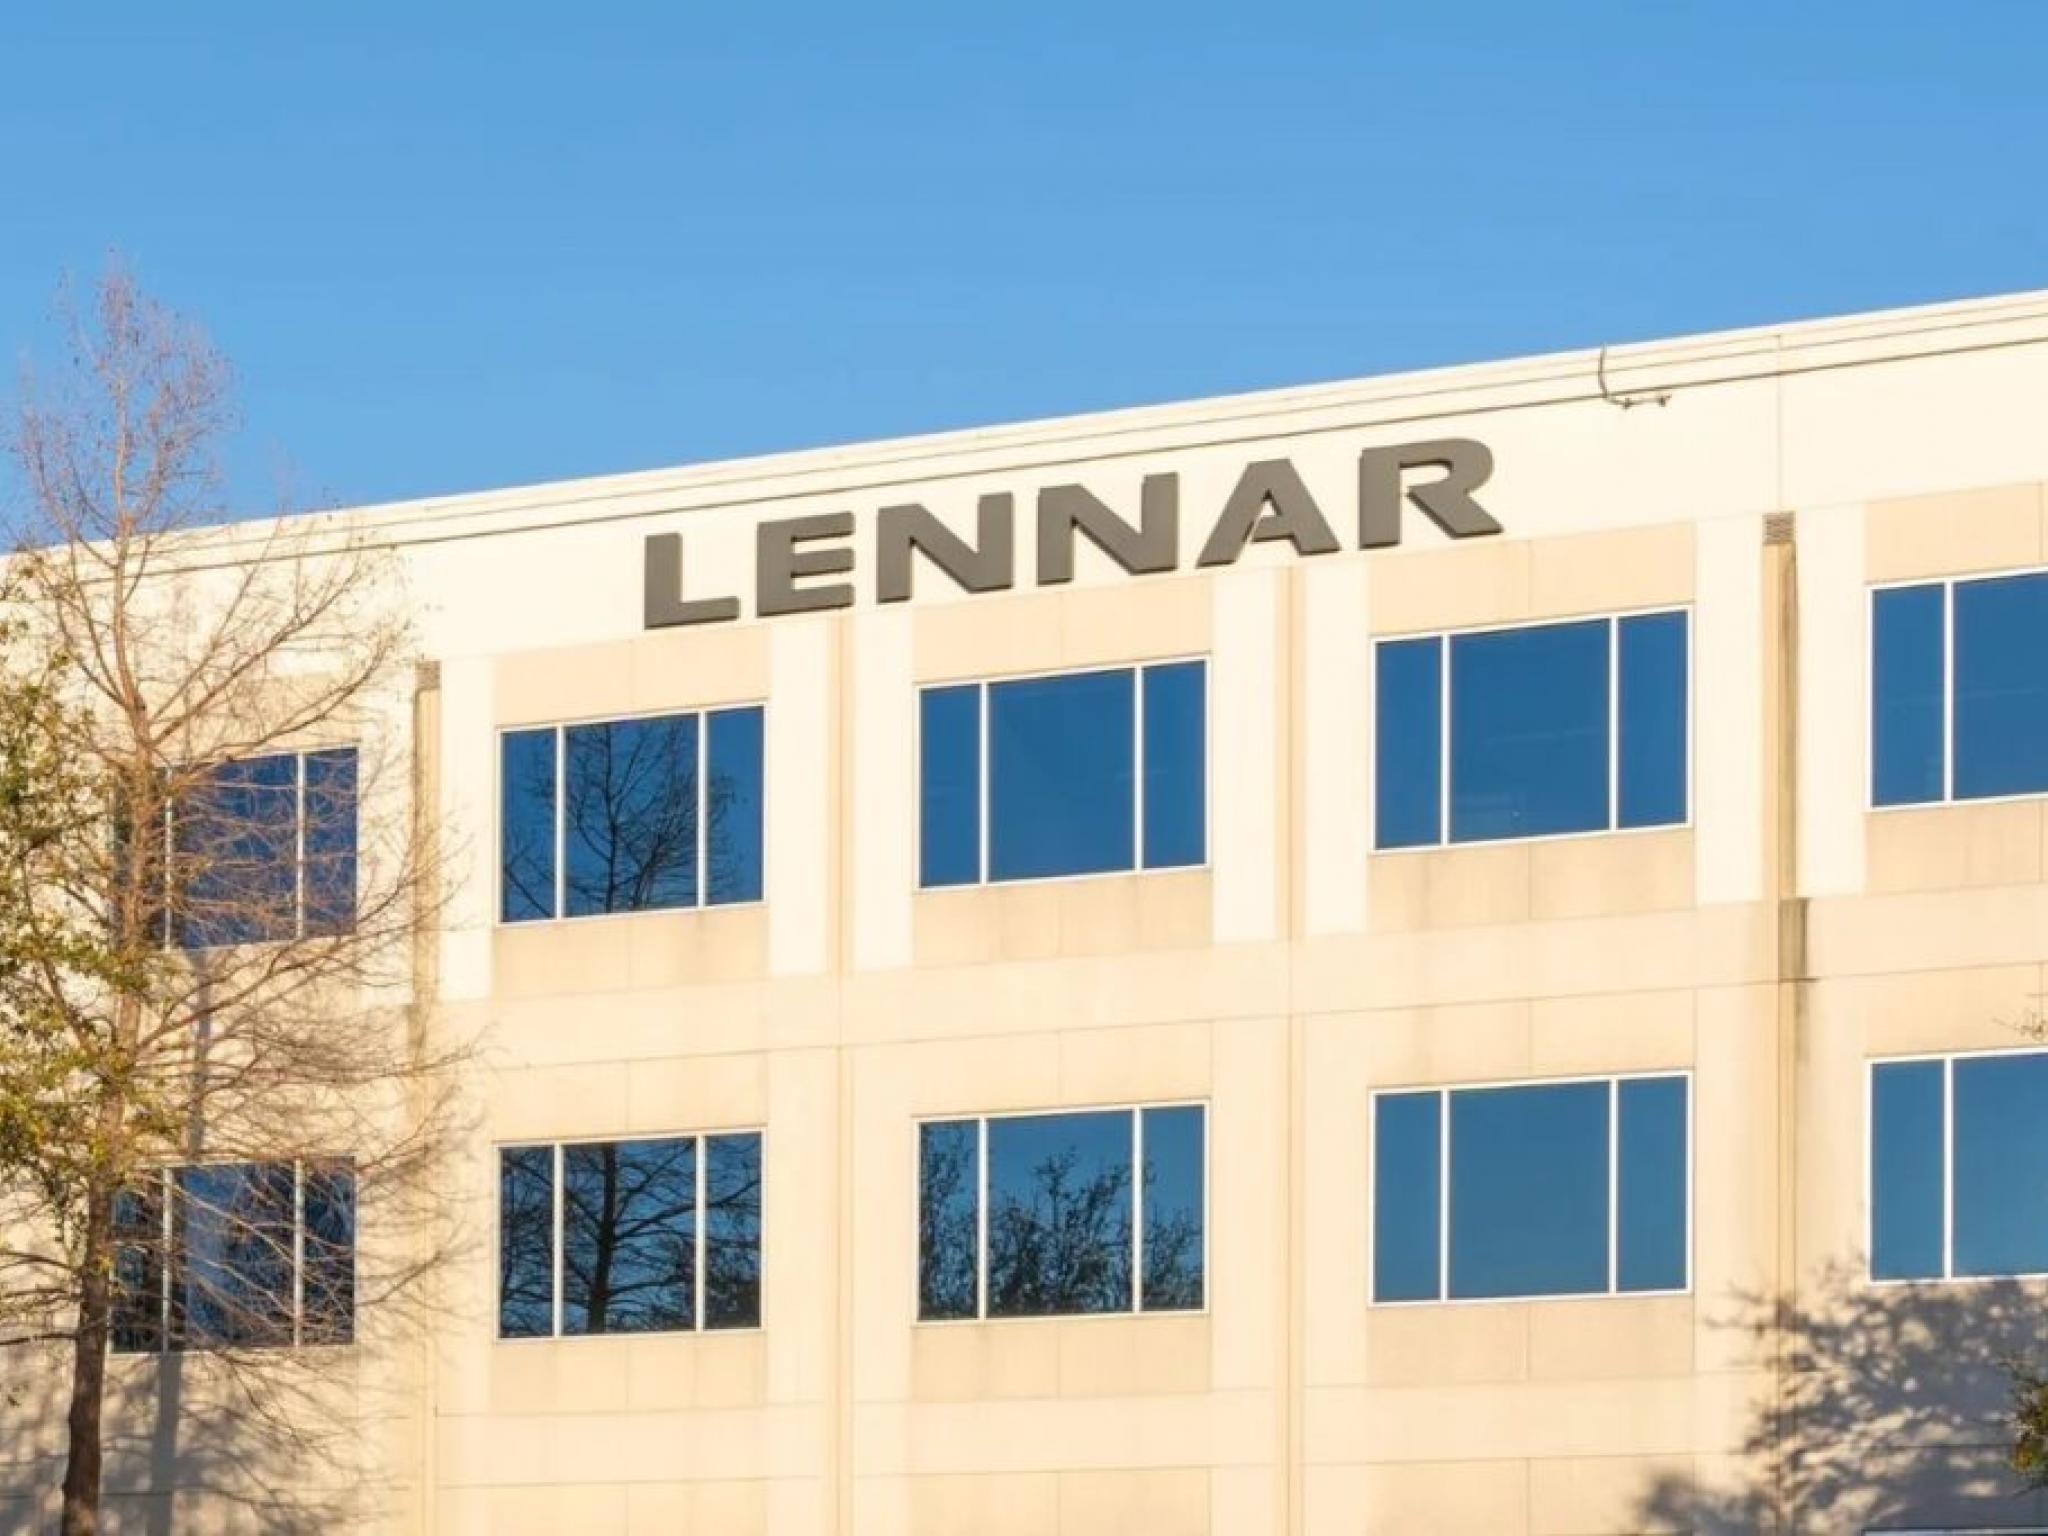  lennar-likely-to-report-lower-q2-earnings-here-are-the-recent-forecast-changes-from-wall-streets-most-accurate-analysts 